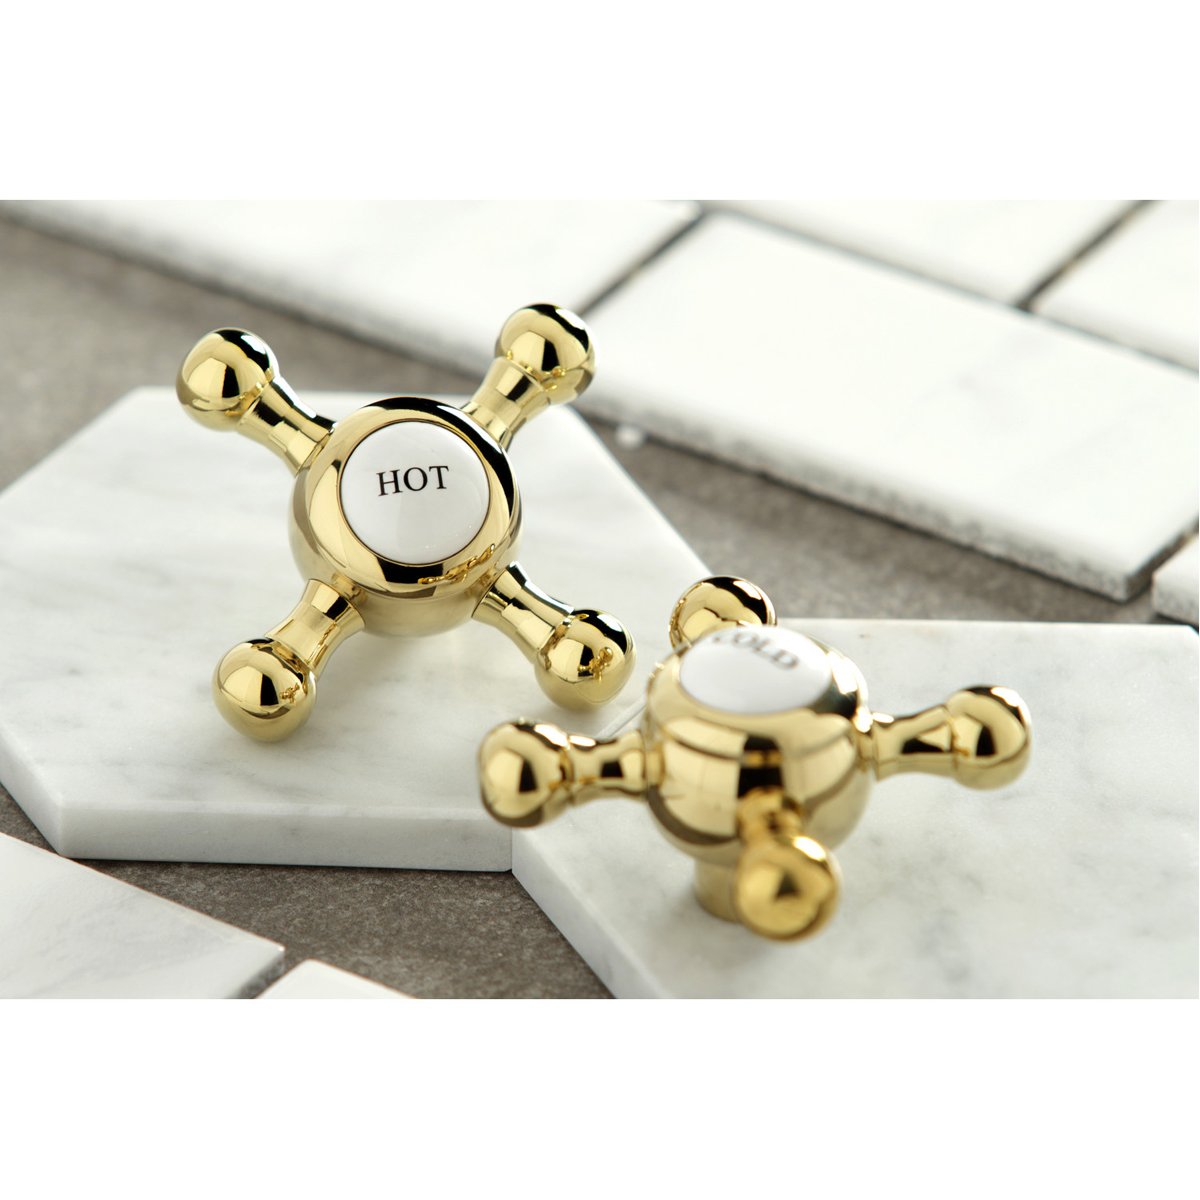 Kingston Brass English Country 8" Widespread Bathroom Faucet